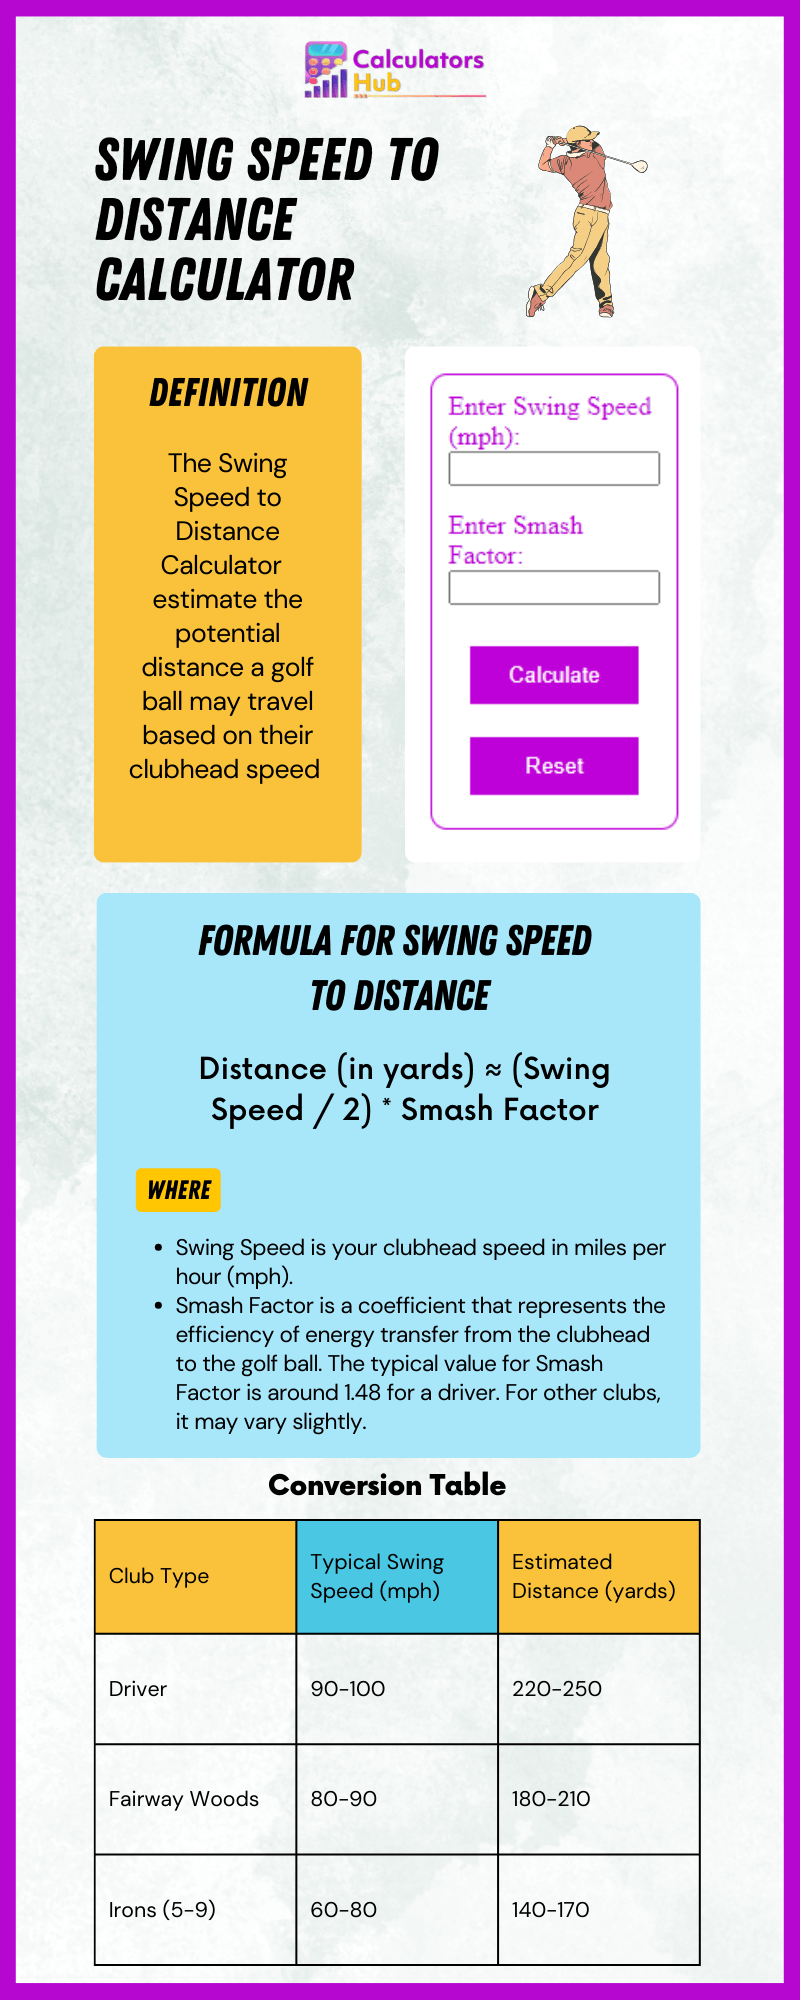 Swing Speed to Distance Calculator